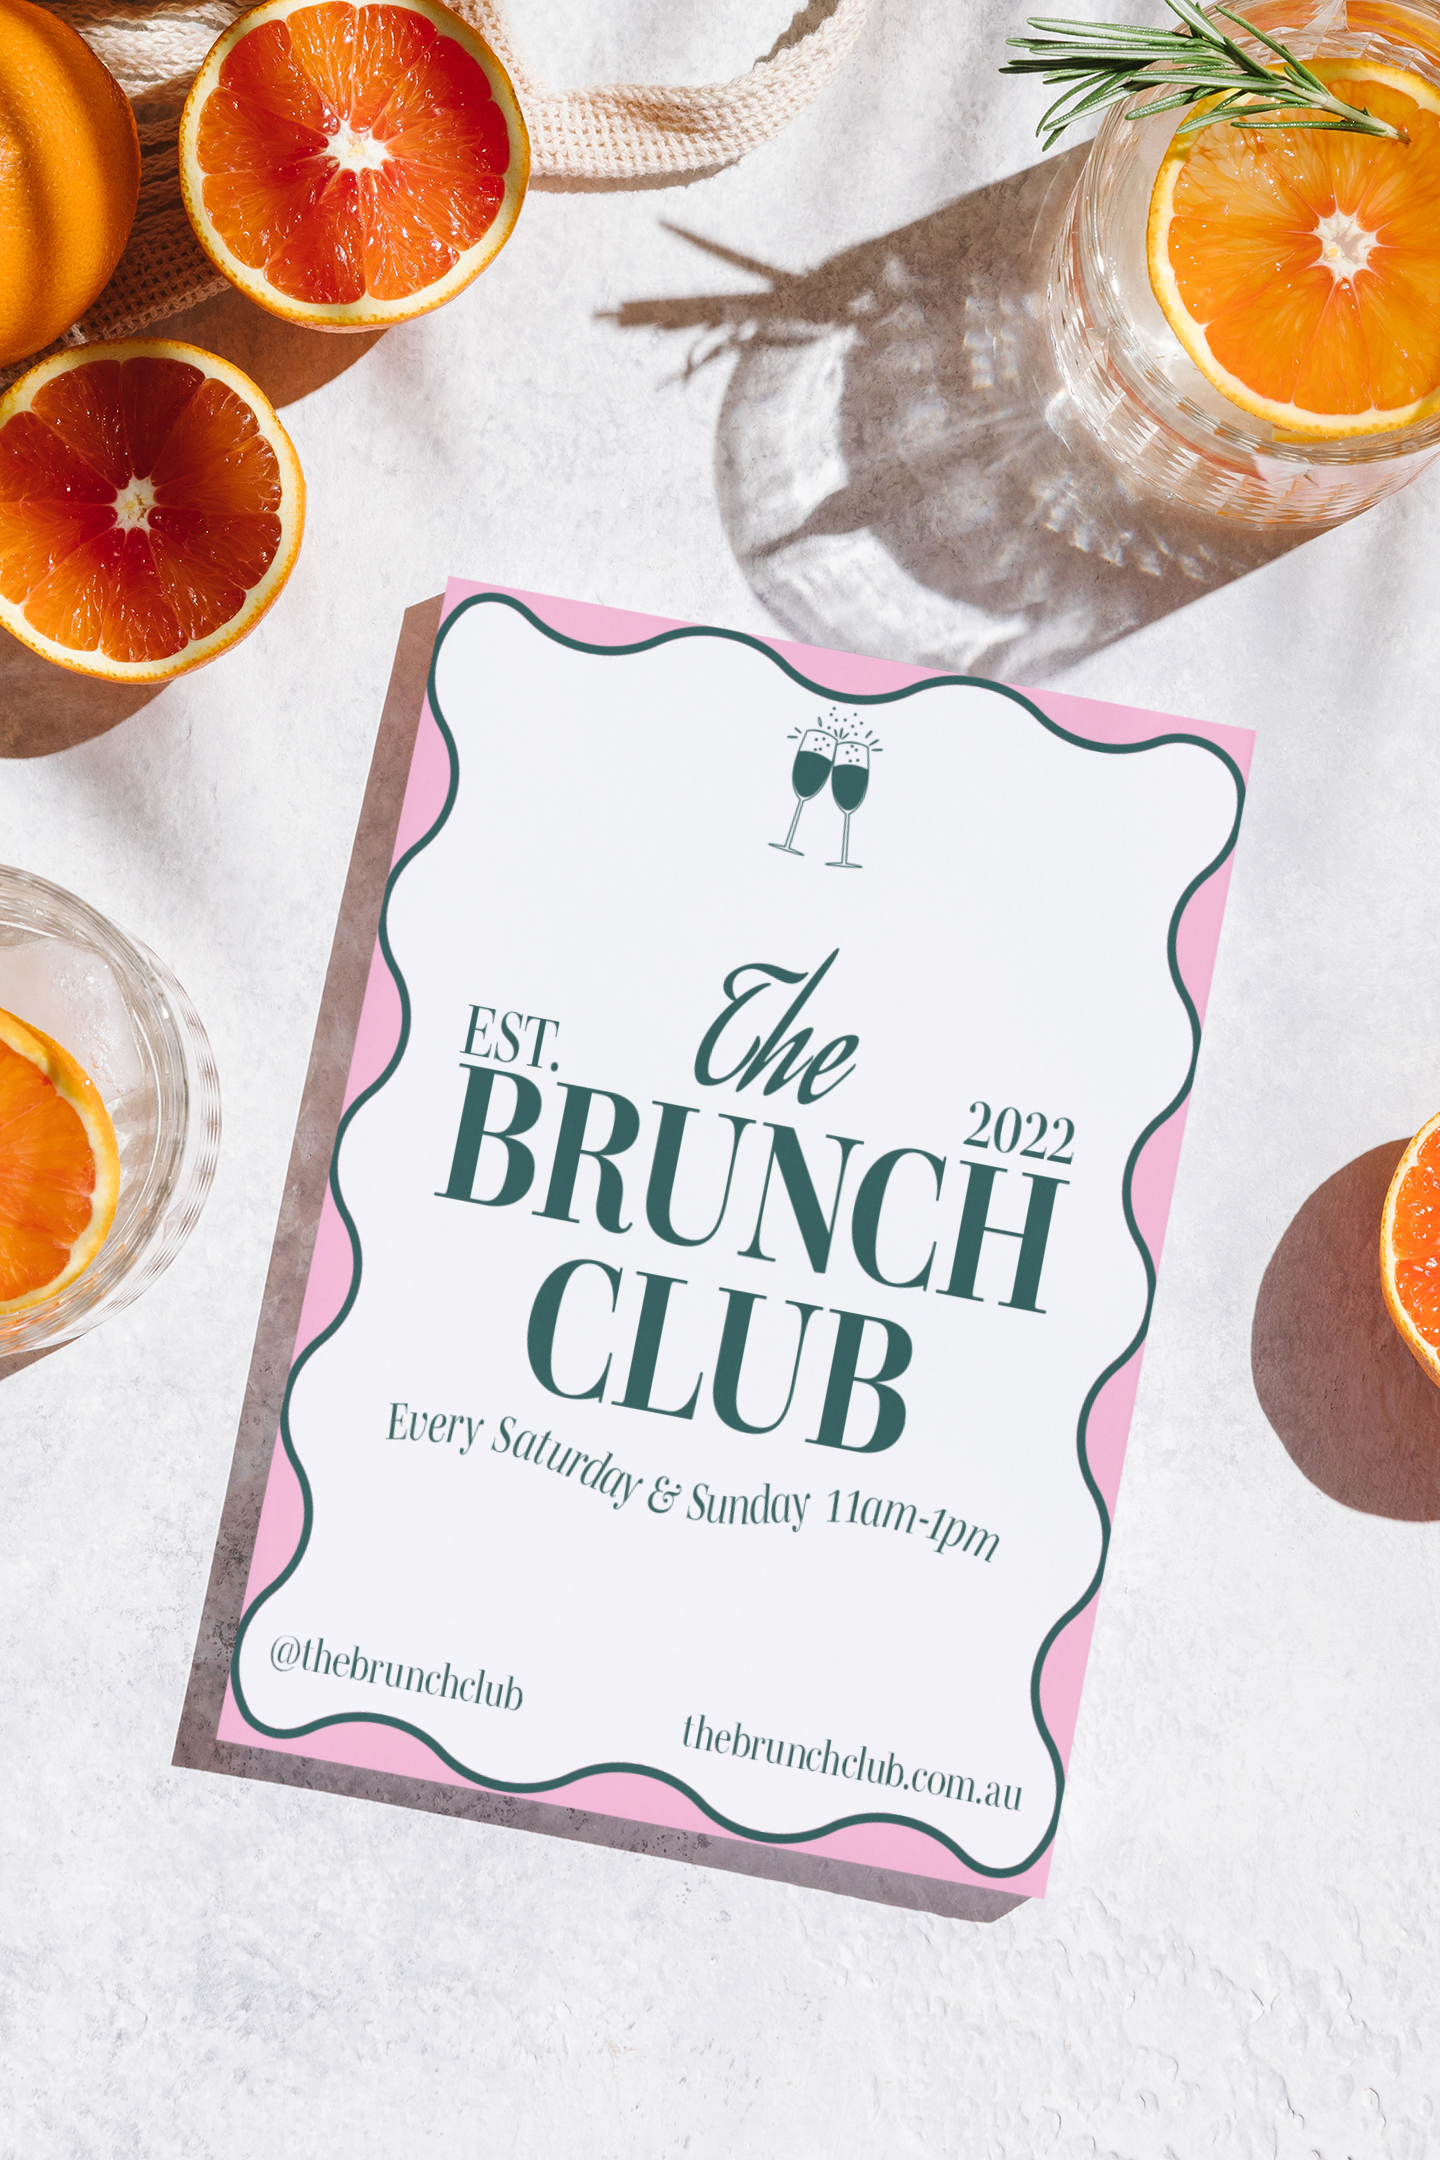 flyer-mockup-featuring-a-bunch-of-oranges-m17746-r-el2.png